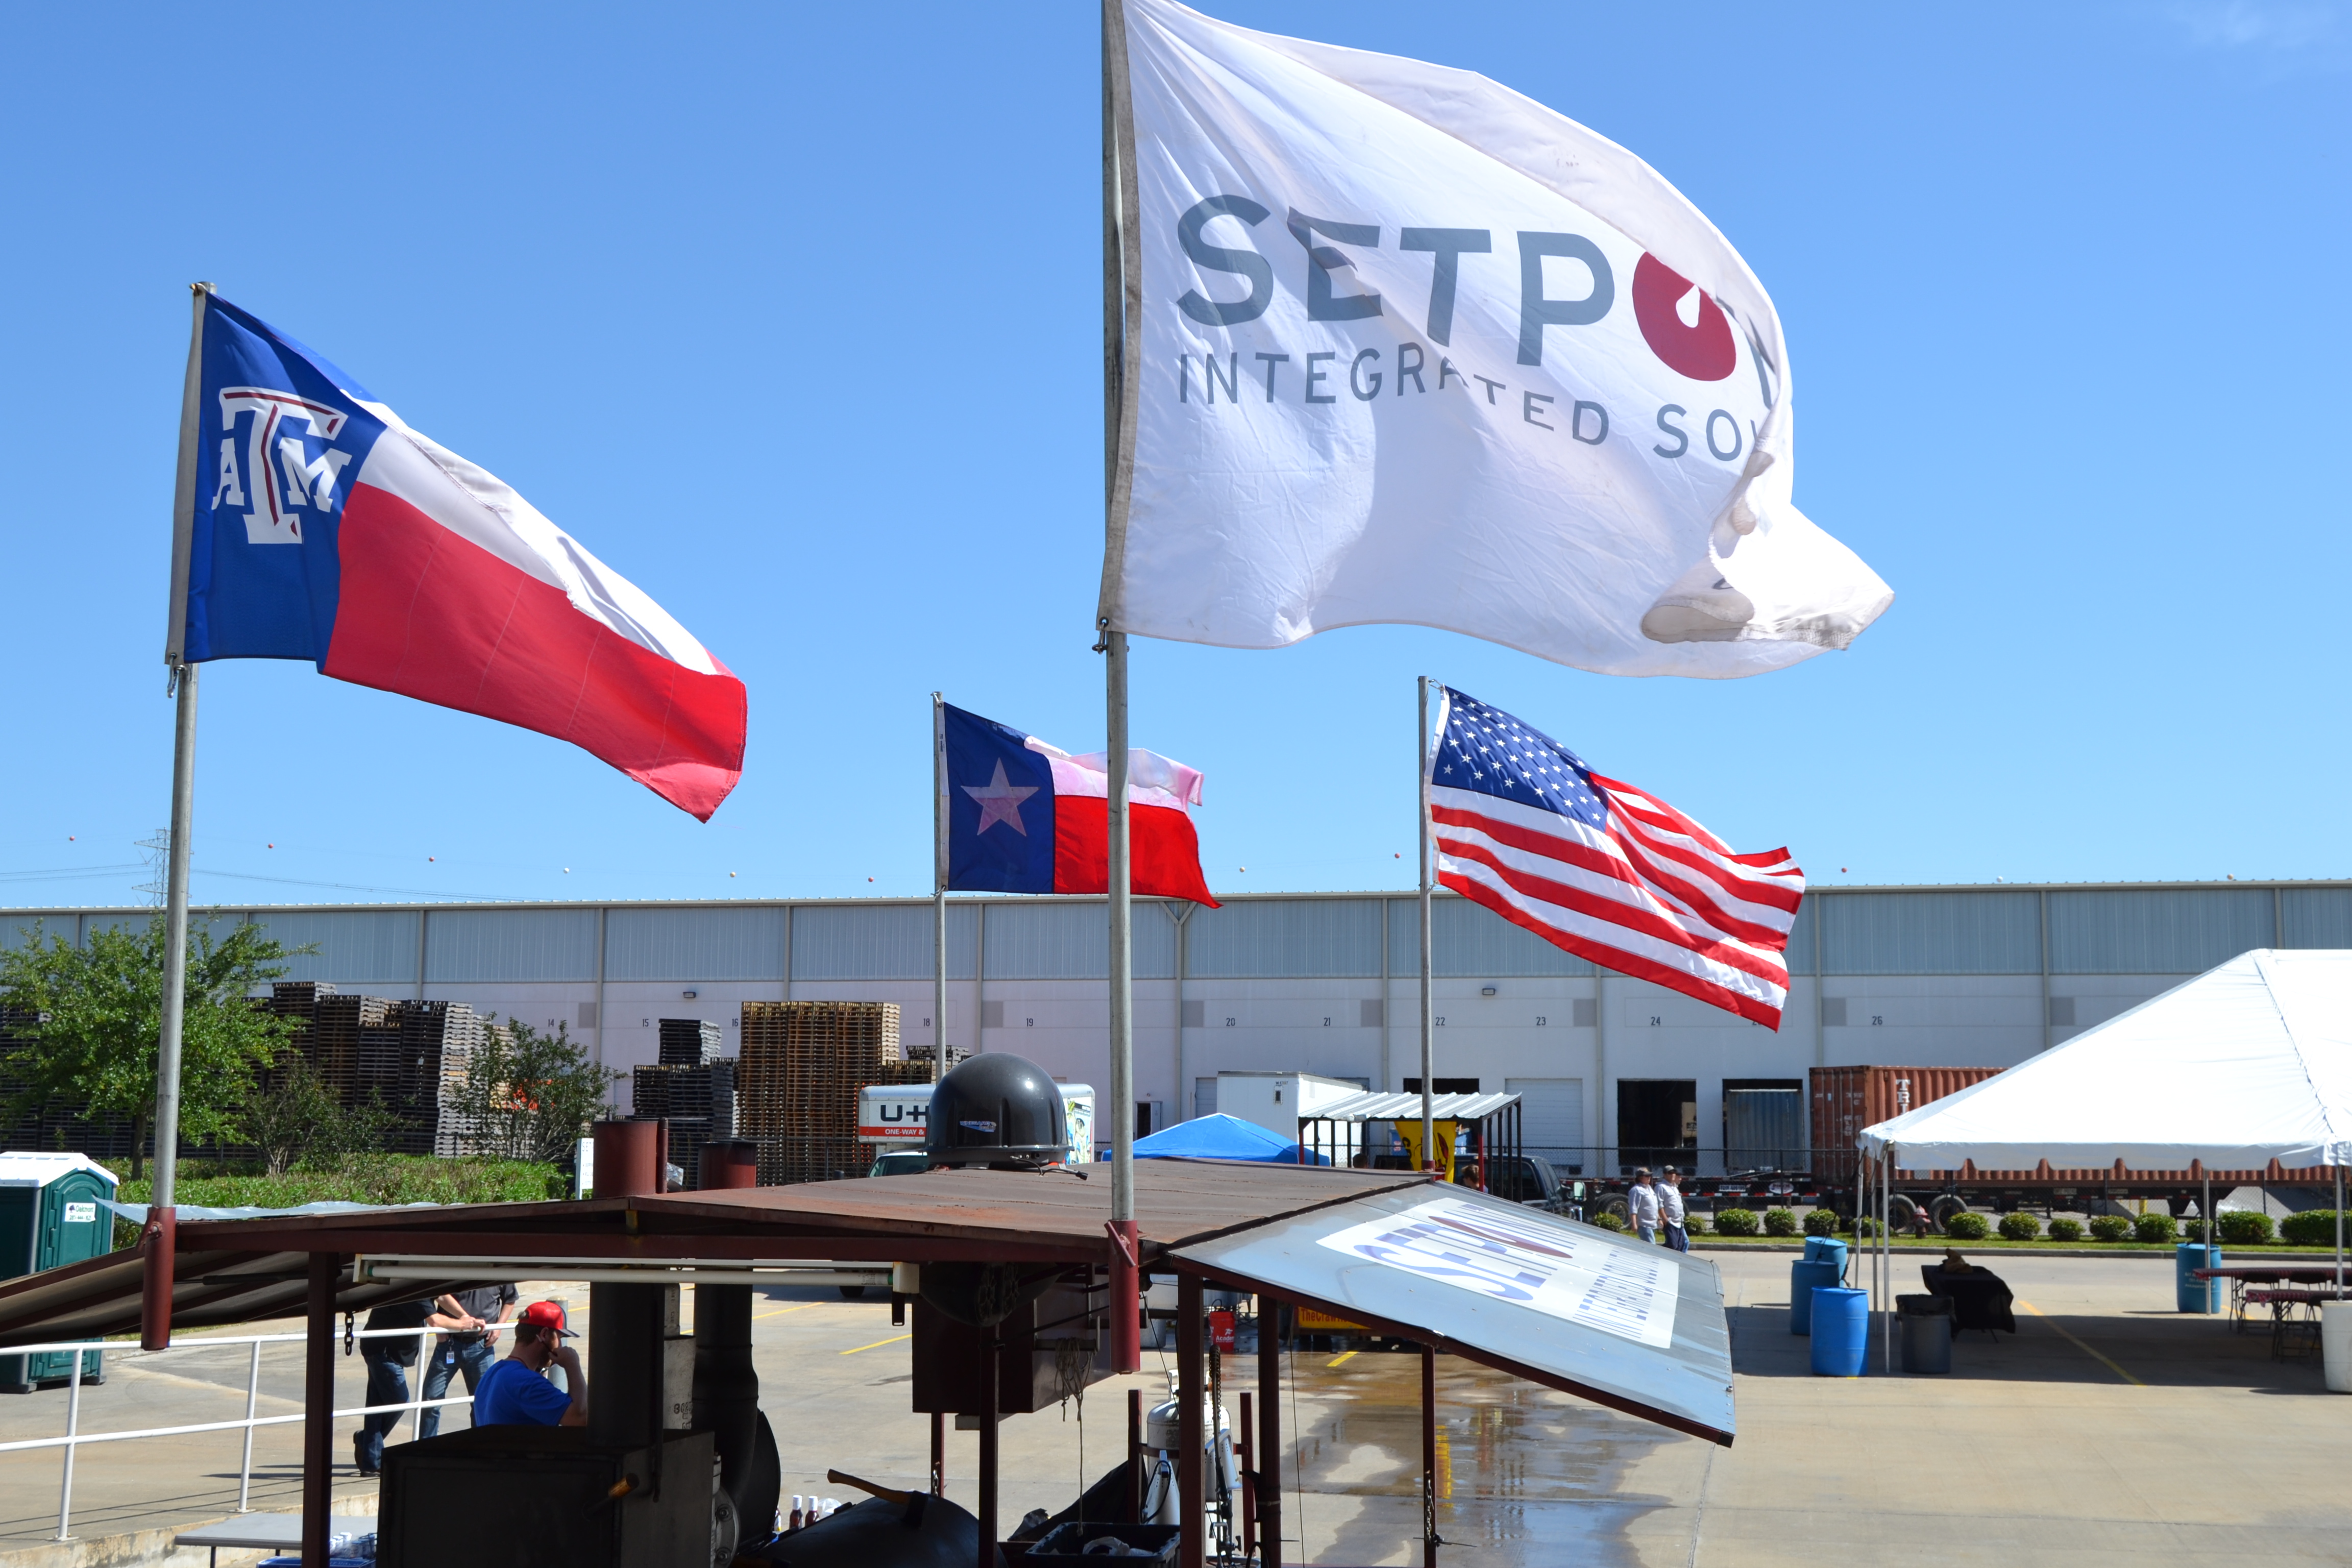 Setpoint IS Flags